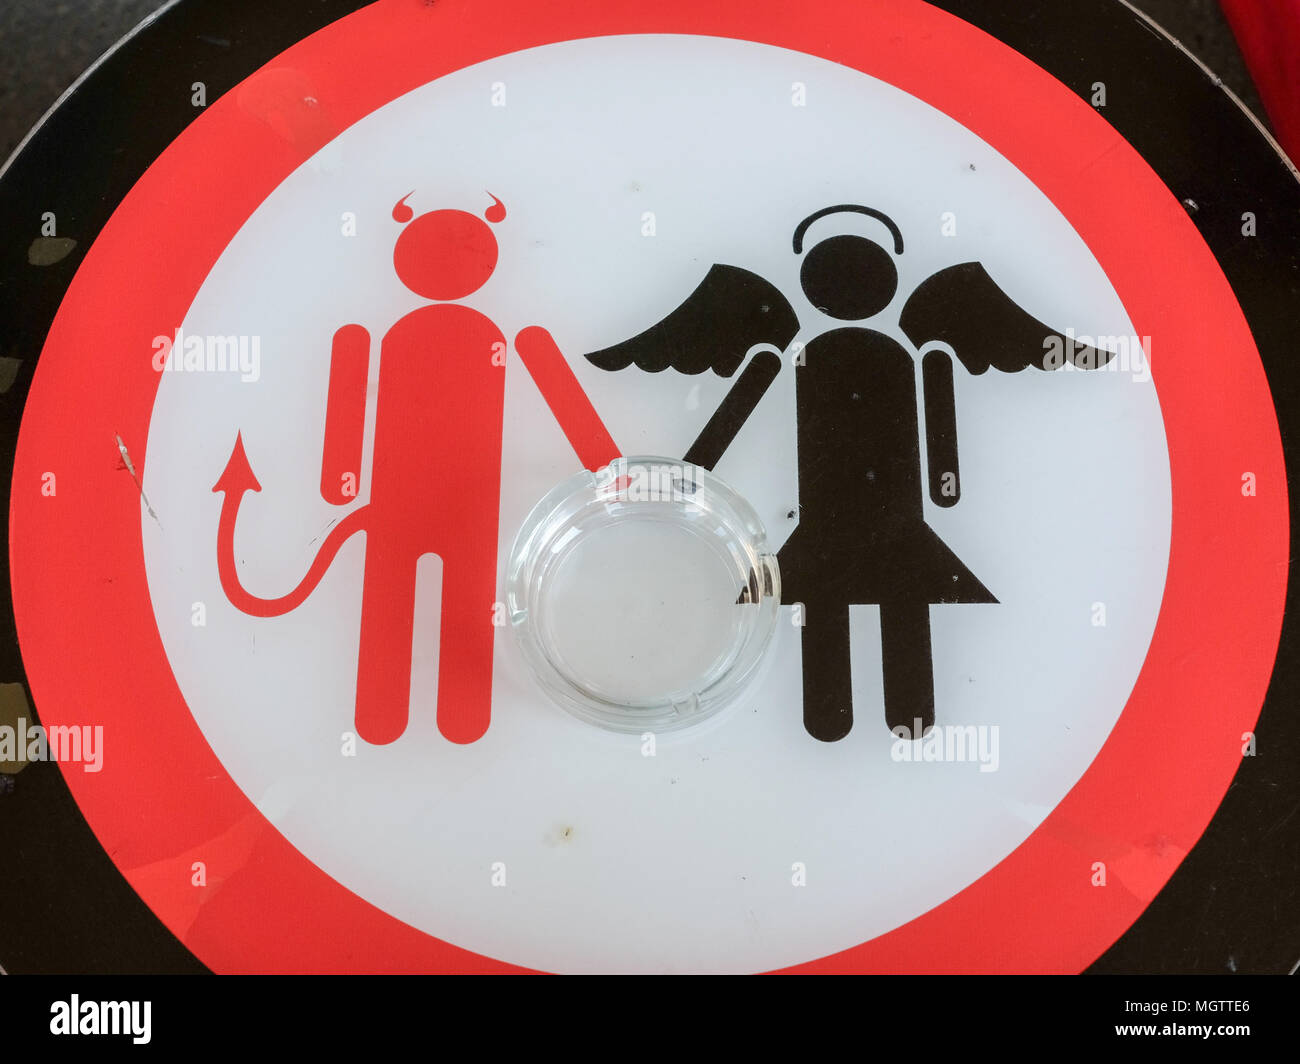 23 April 2018, Budapest, Germany: An angel and a devil are depicted on a table with an ashtray on it. Photo: Jens Kalaene/dpa-Zentralbild/ZB Stock Photo